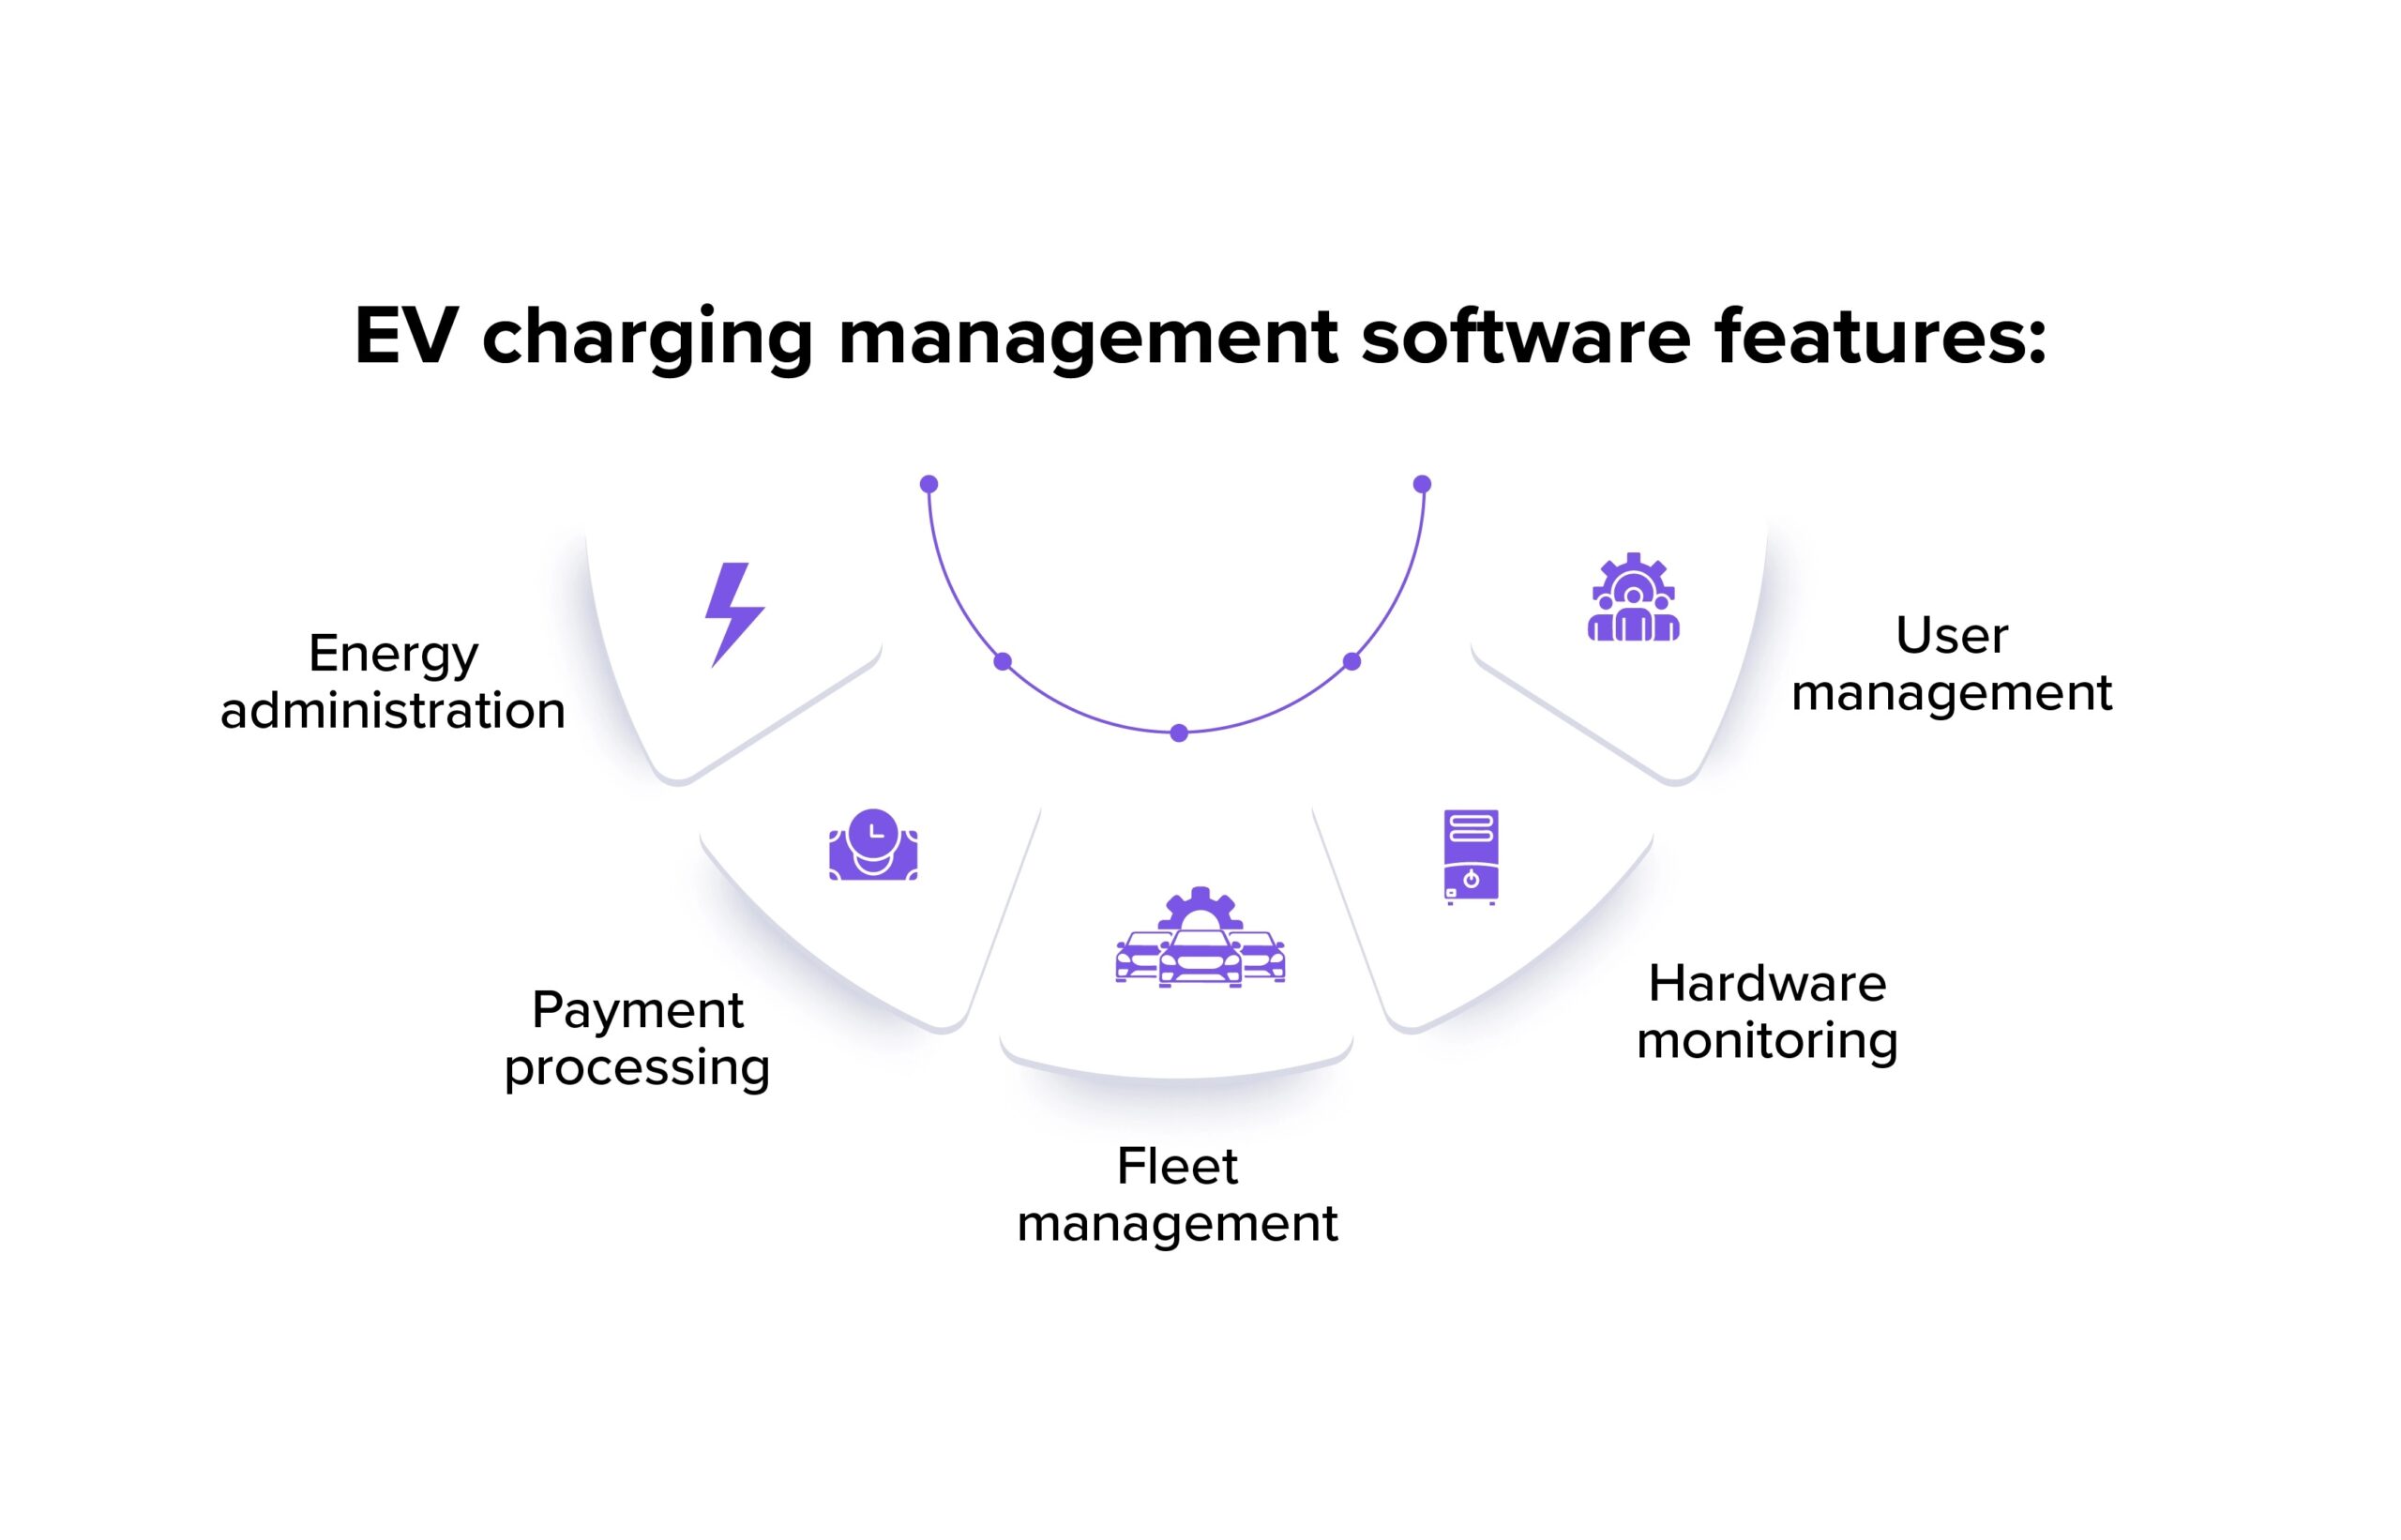 Key Features of EV Charging Management Software